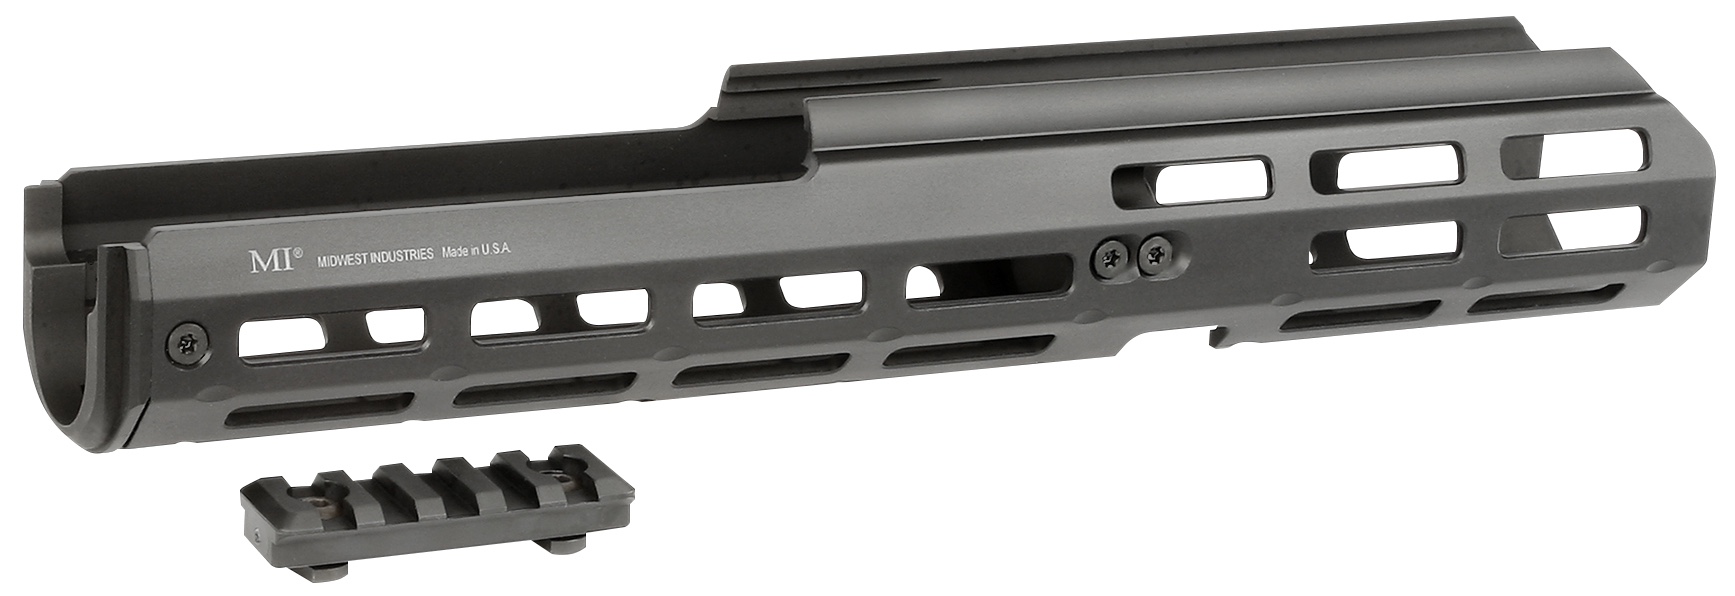 Industries Releases New Accessories Lineup for the Benelli - Soldier Systems Daily